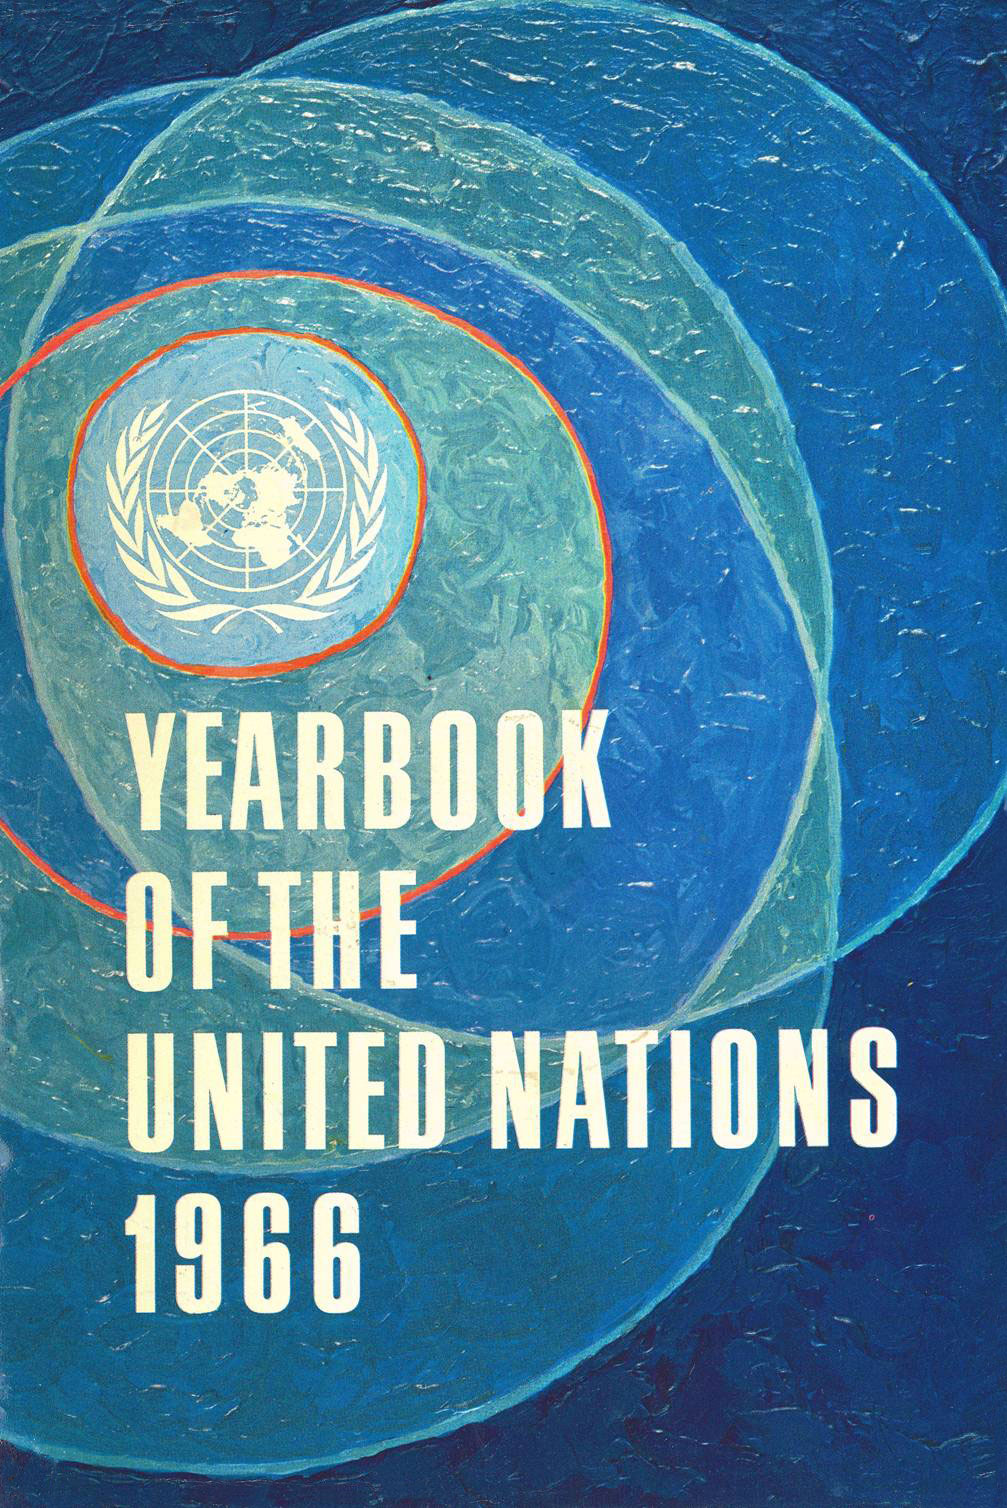 image of Yearbook of the United Nations 1966